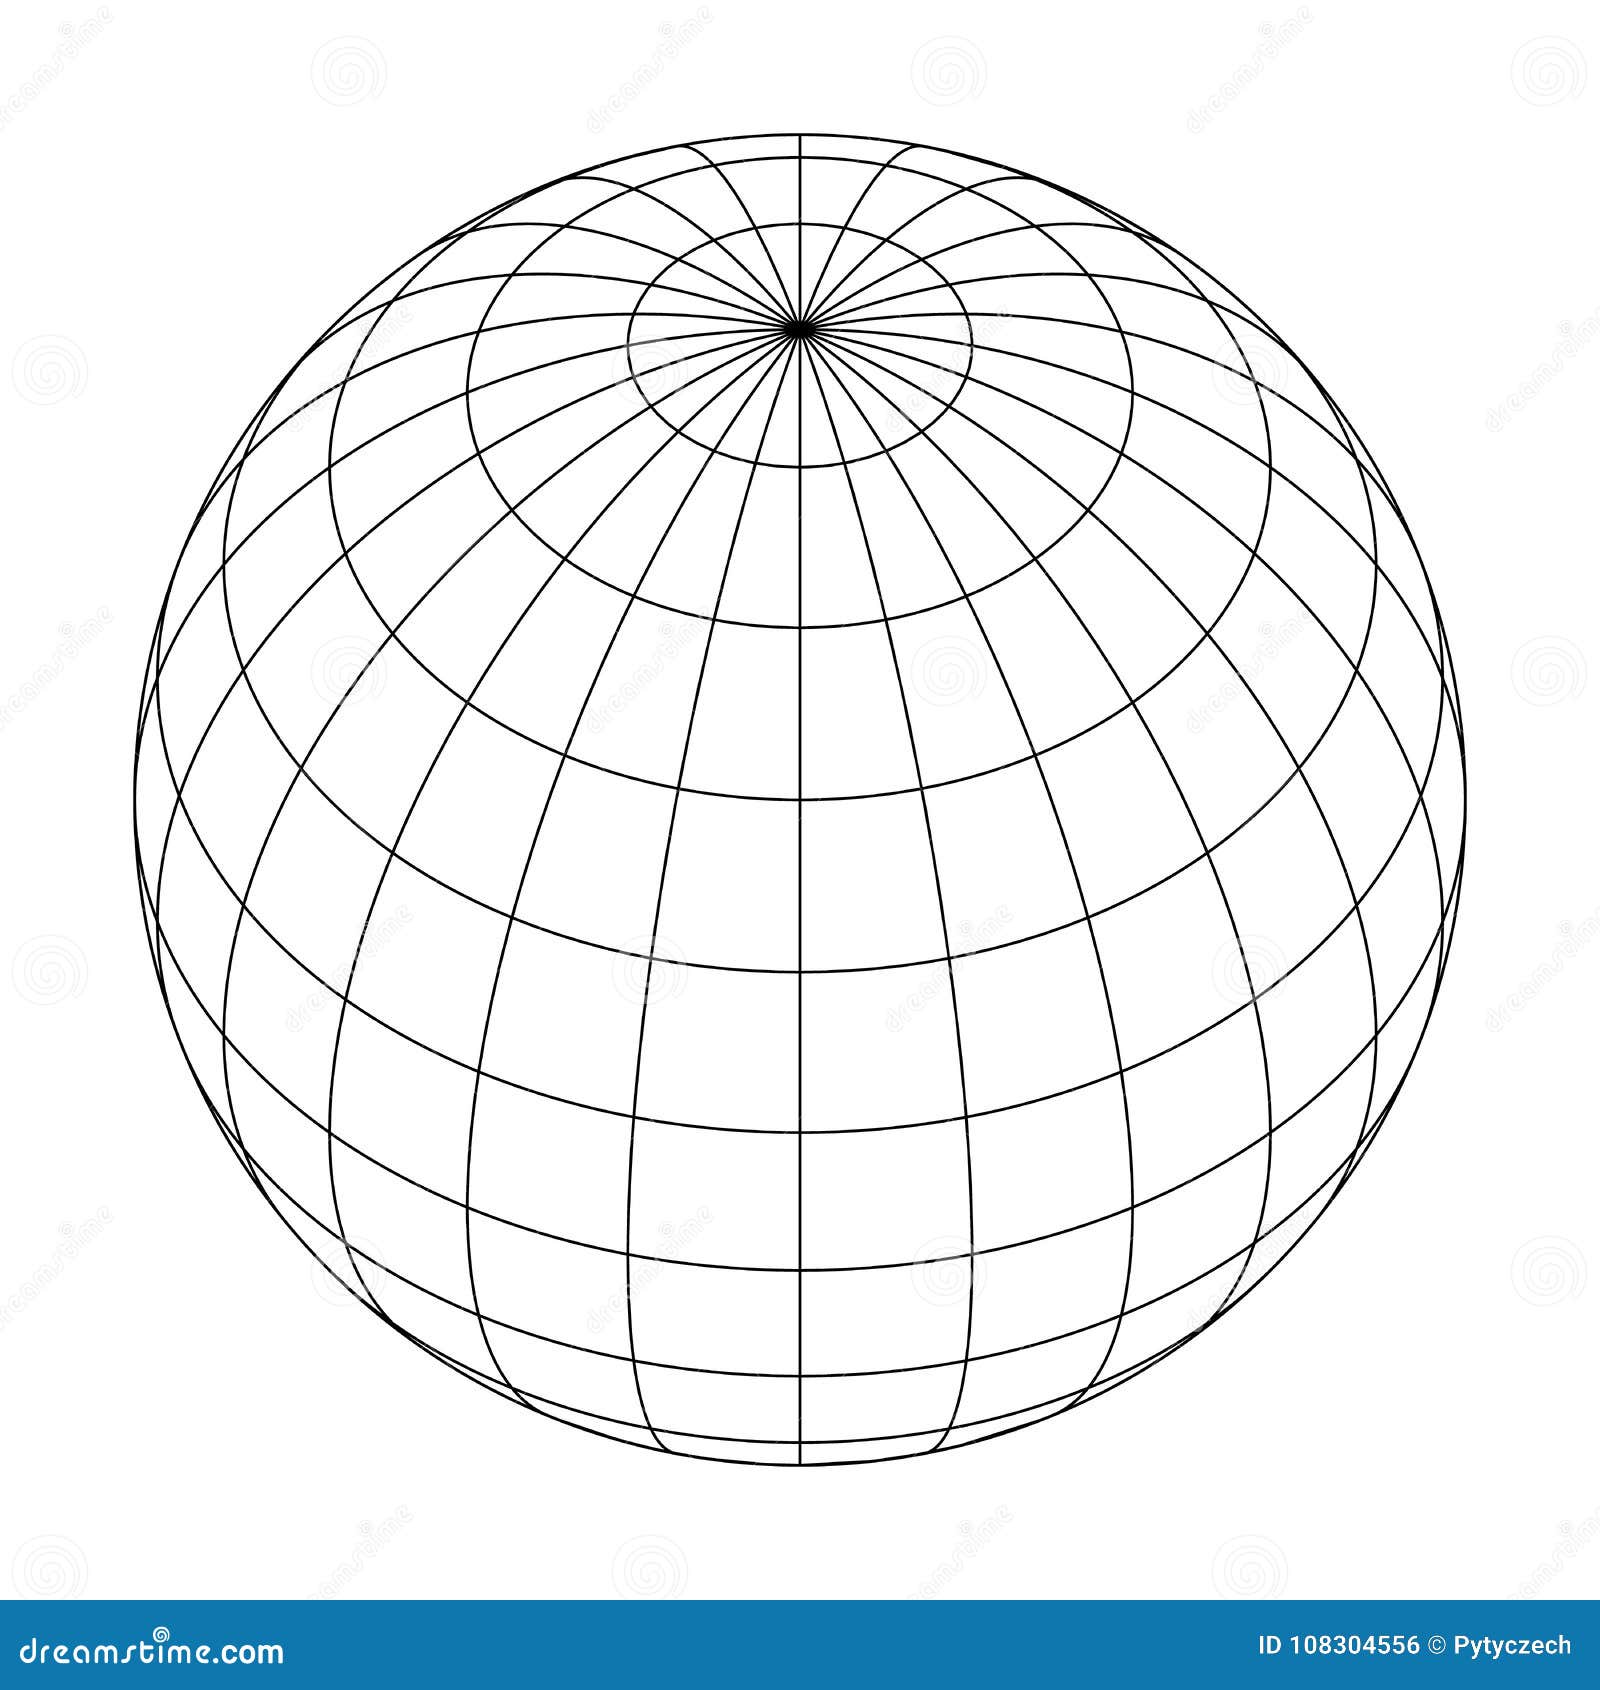 earth planet globe grid of meridians and parallels, or latitude and longitude. 3d  